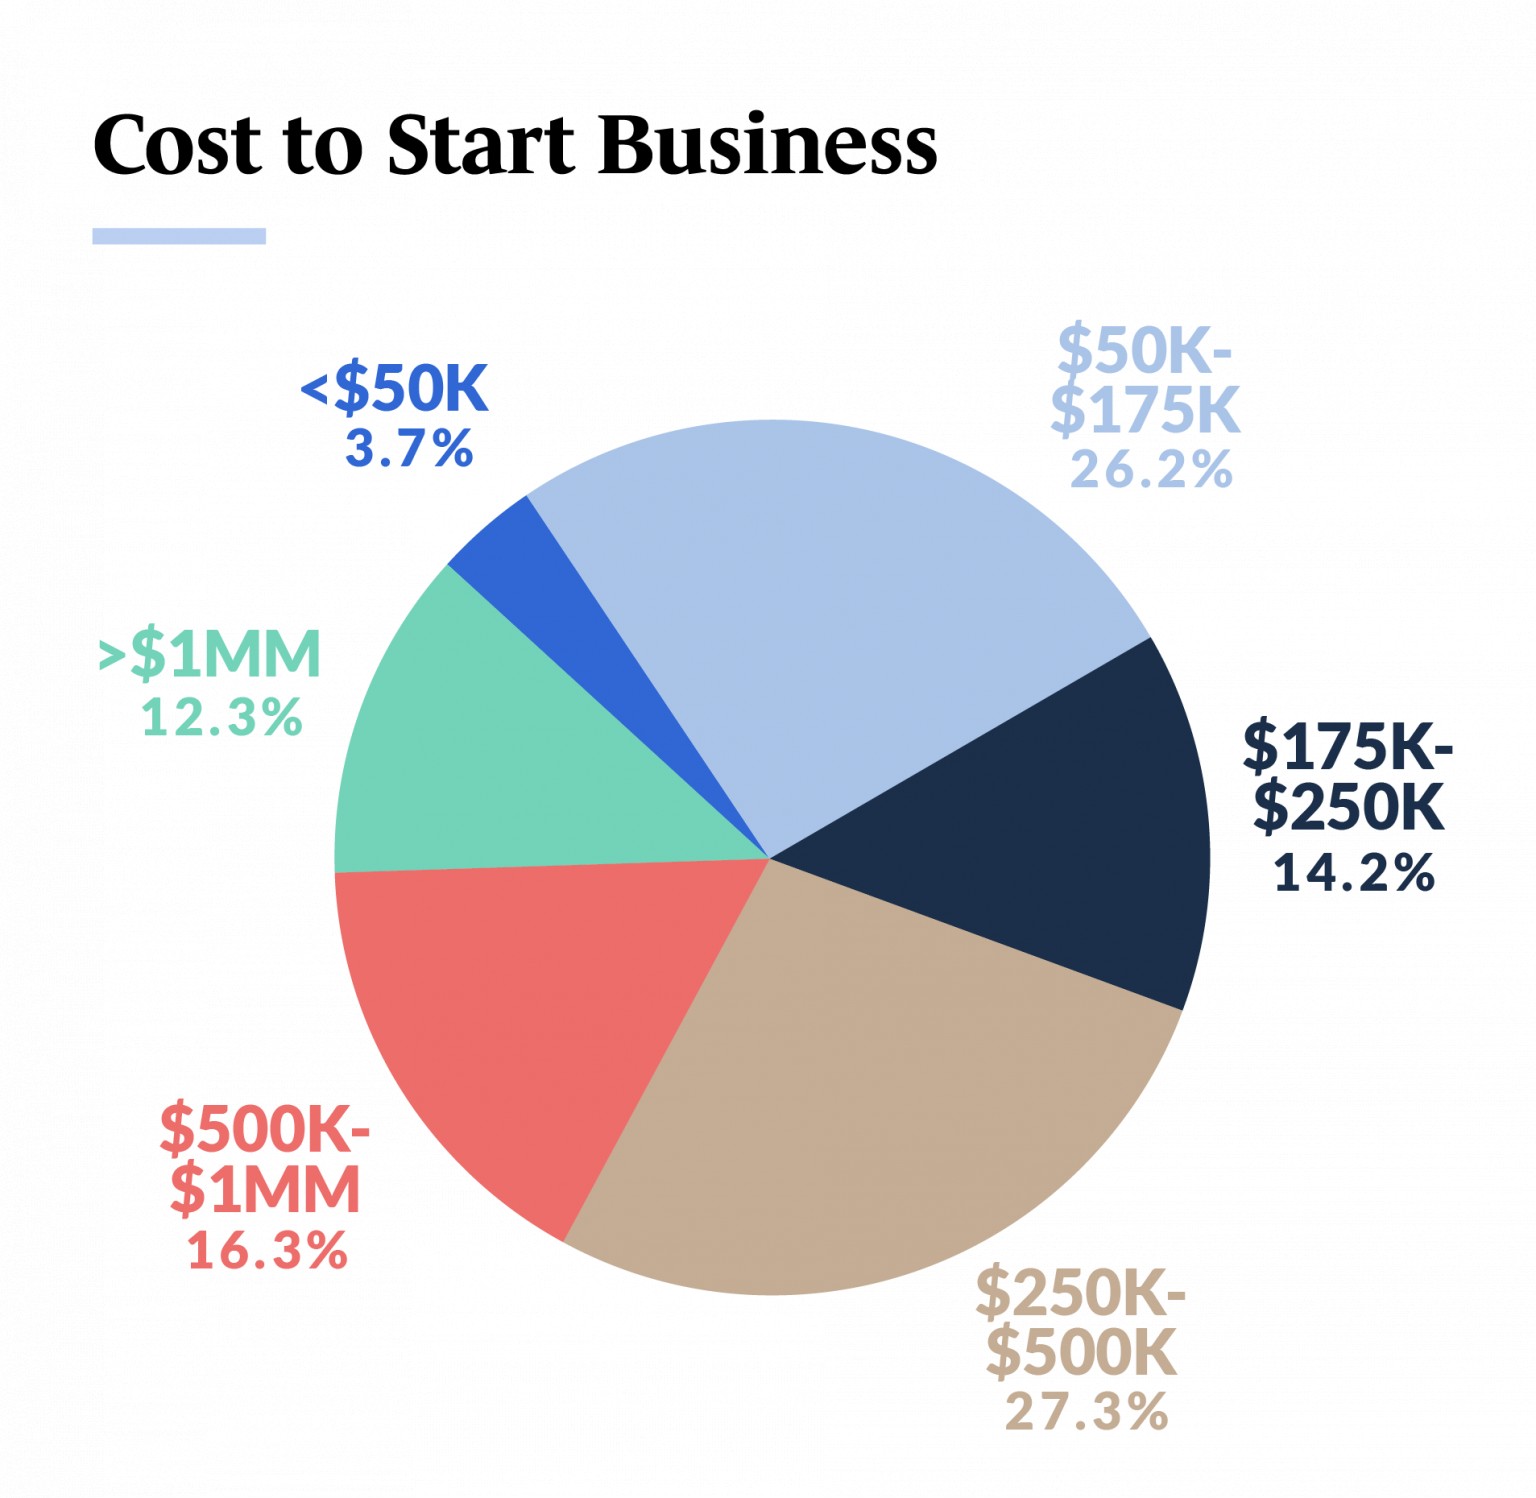 small business statistics pie chart of cost to start a small business